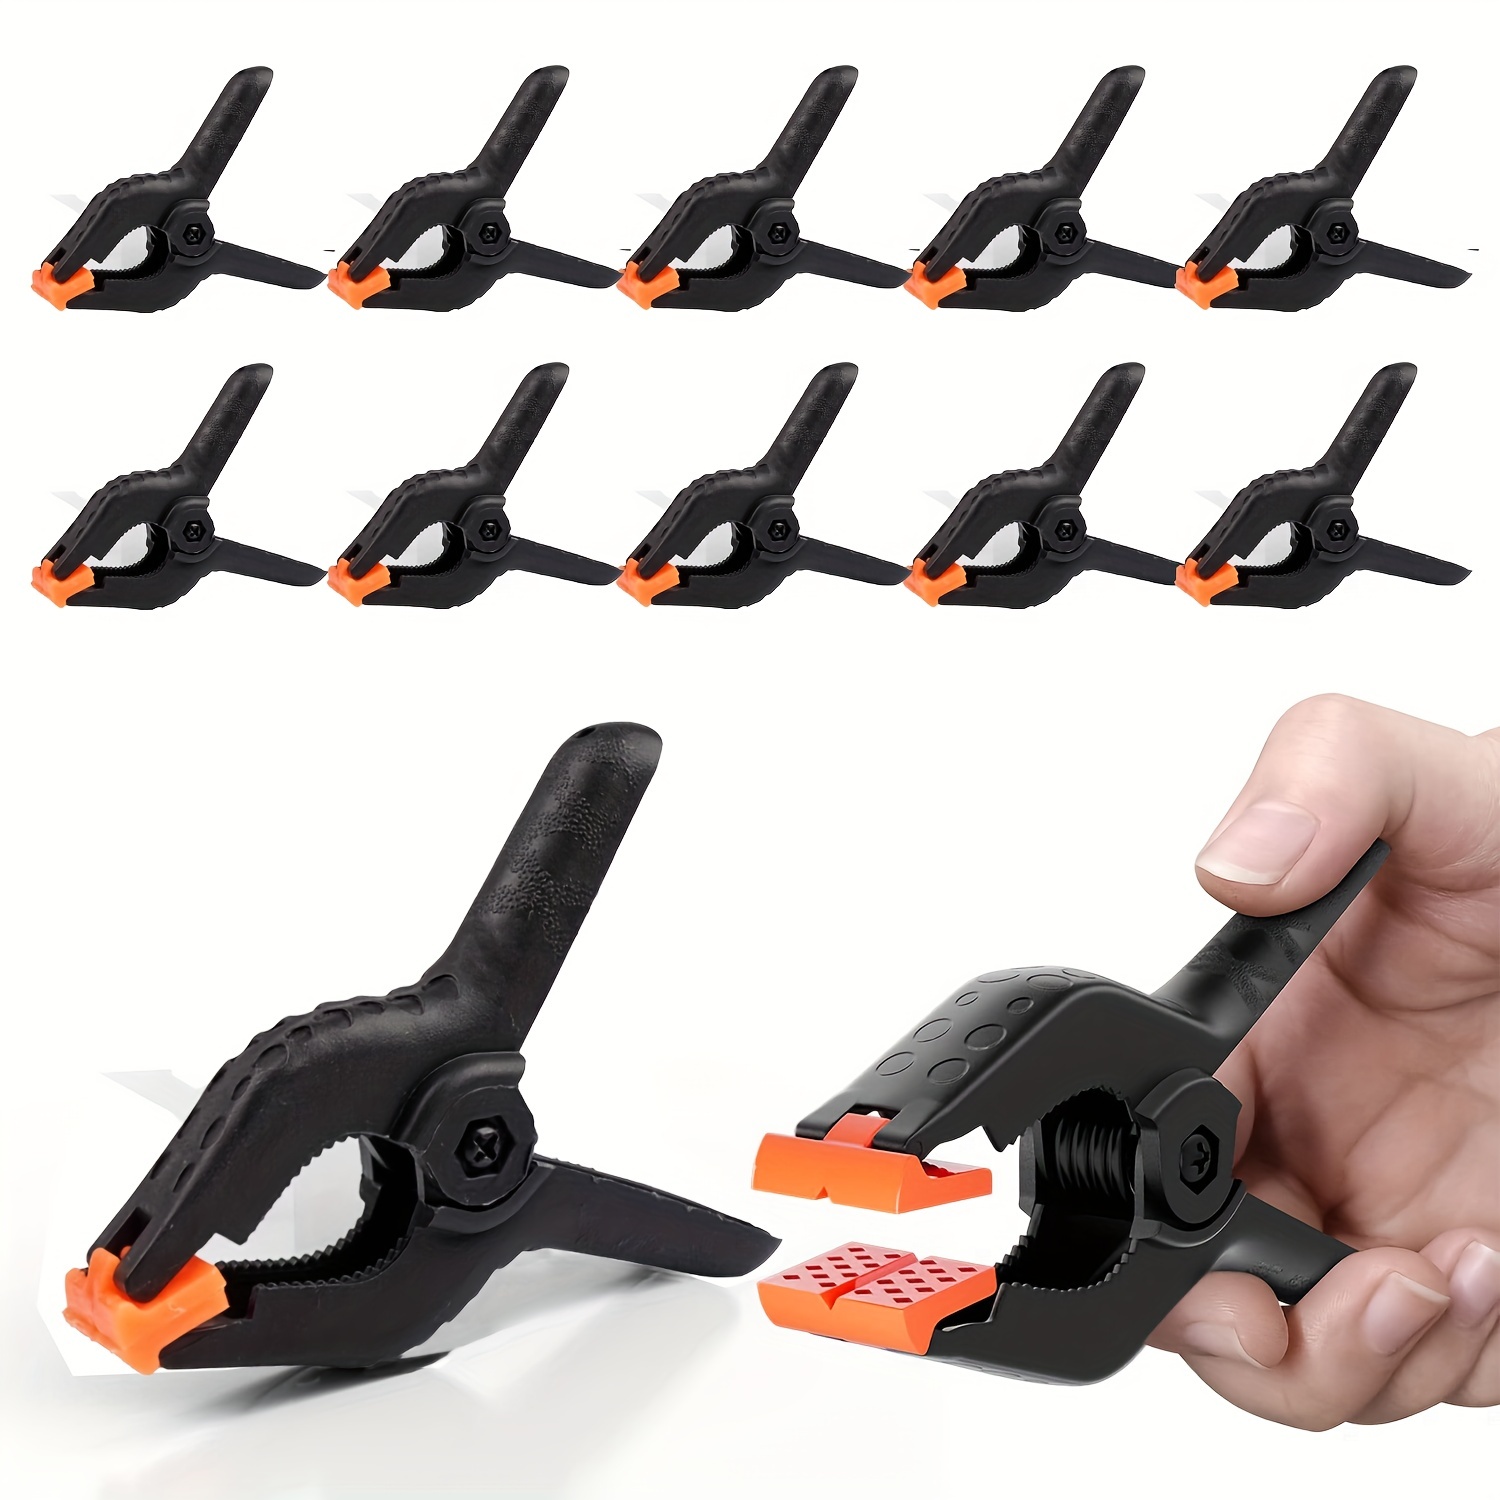 10 Pcs 4.5 inch Professional Plastic Large Spring Clamps Heavy Duty for Crafts or Plastic Clips and Backdrop Clips Clamps for Backdrop Stand